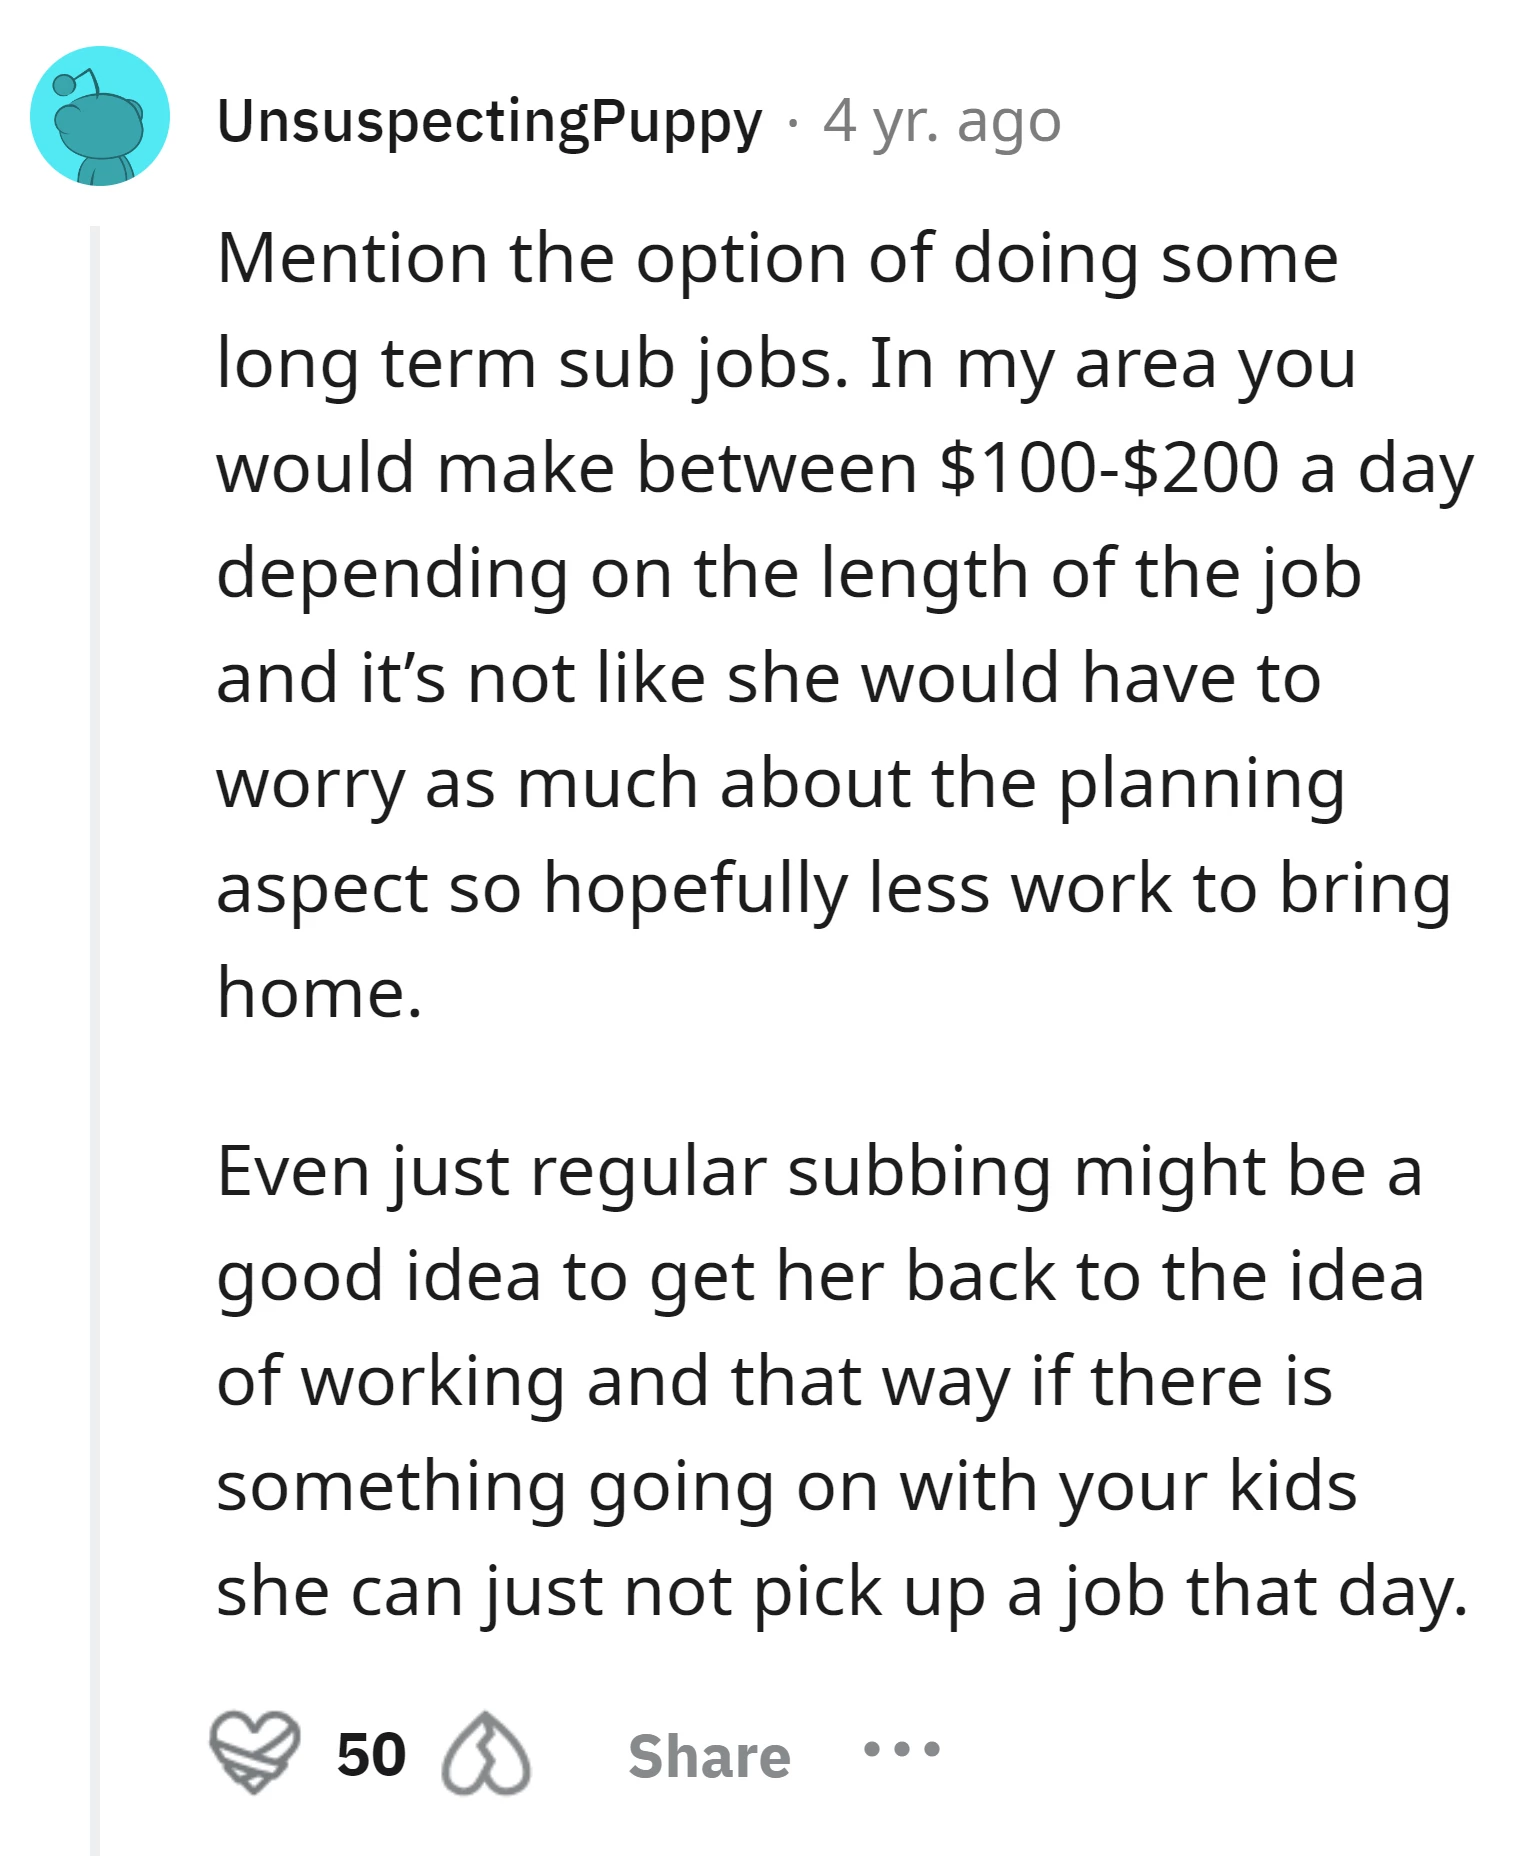 Redditor suggests proposing long-term substitute teaching jobs for the wife